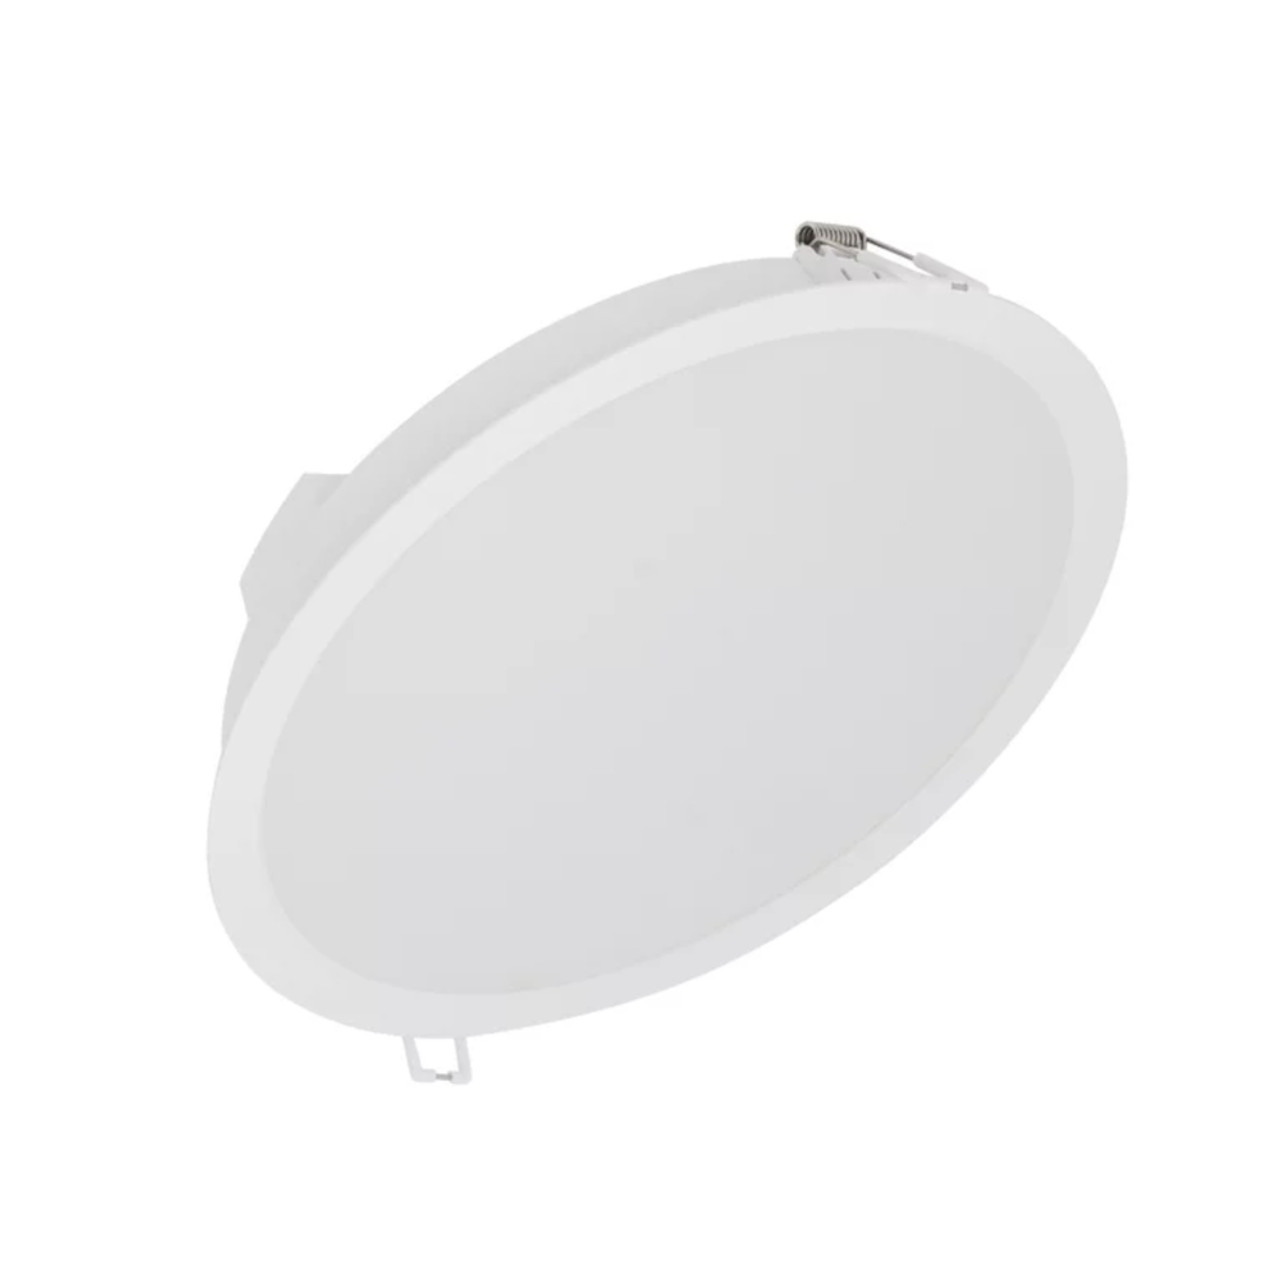 LED Downlight 24W 2400lm 6500K IP44 100 Degrees 200mm Cut Out Ledvance